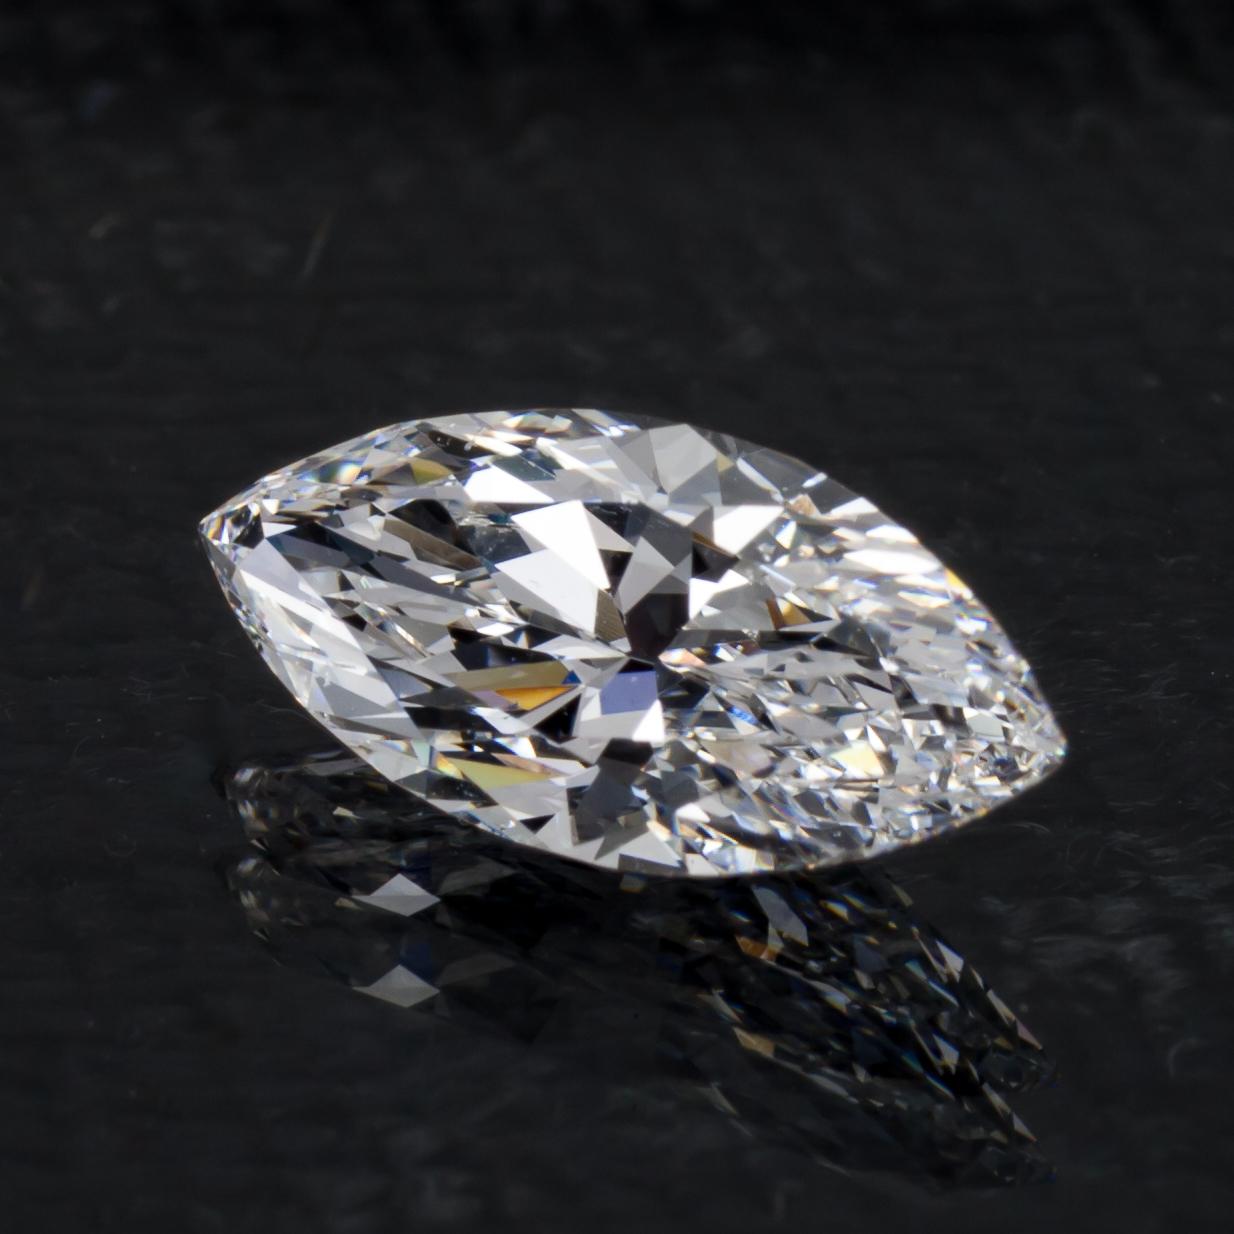 Modern 1.58 Carat Loose D / SI1 Marquise Brilliant Cut Diamond GIA Certified For Sale